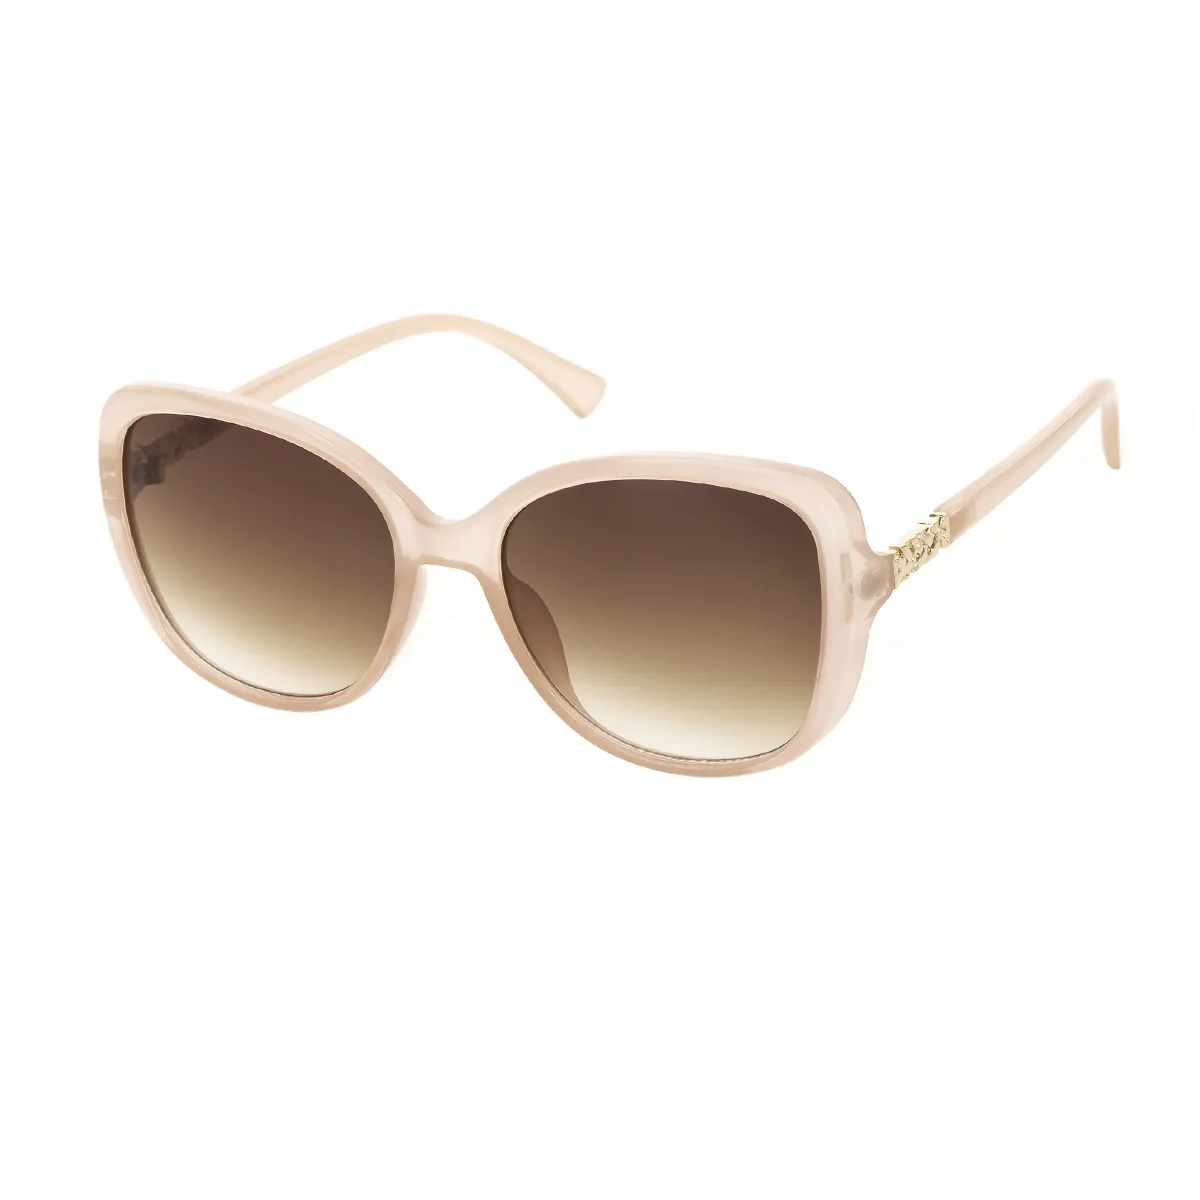 Darry - Oval Pink Sunglasses for Women